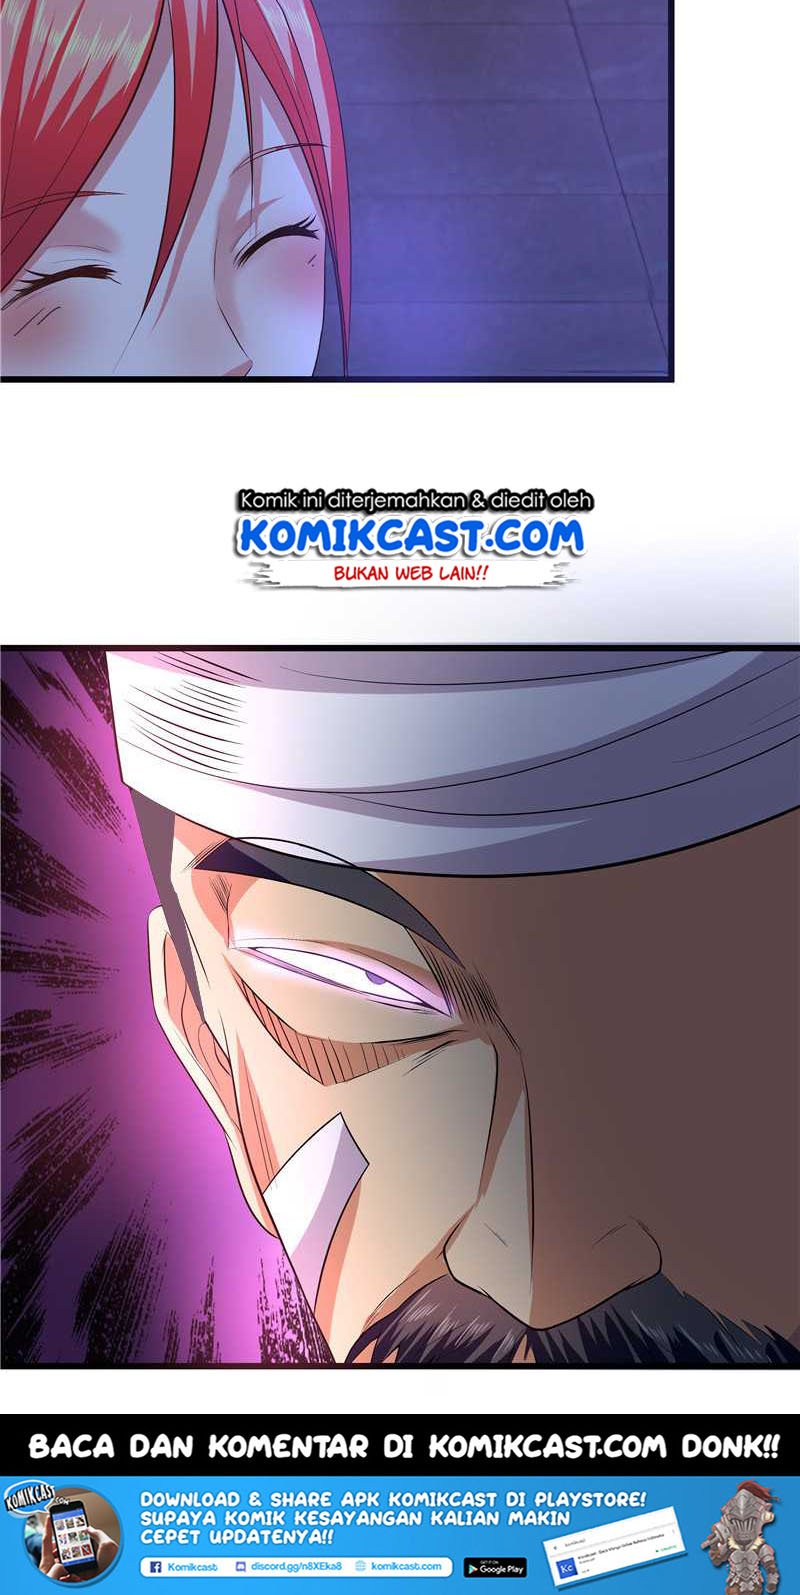 First Rate Master Chapter 21.1